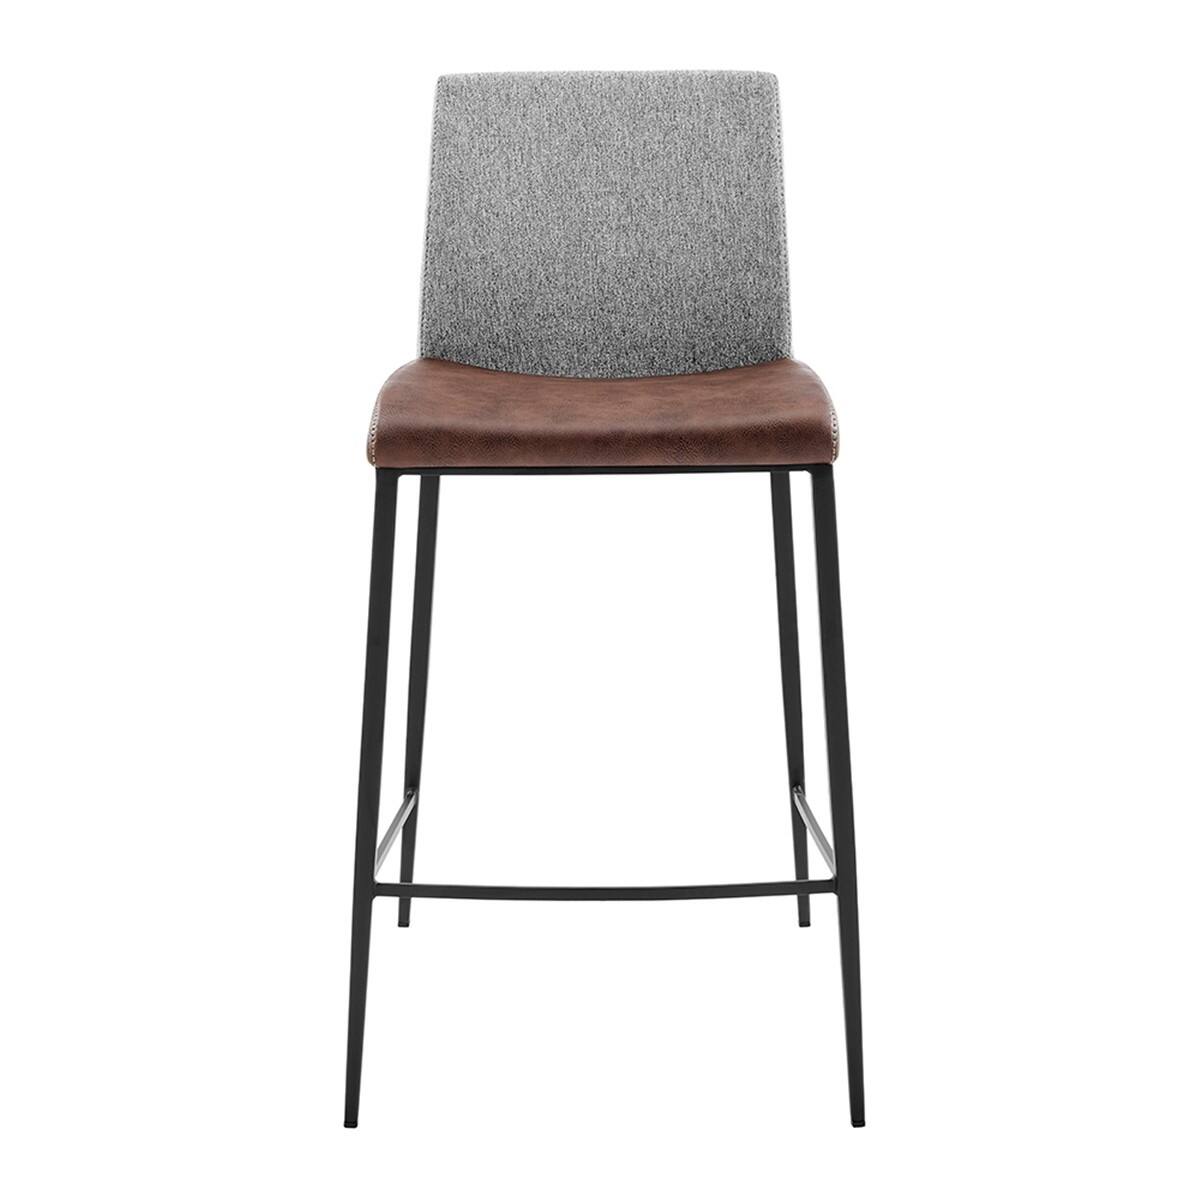 Set of Two Faux Leather and Fabric Counter Stools - 18.51